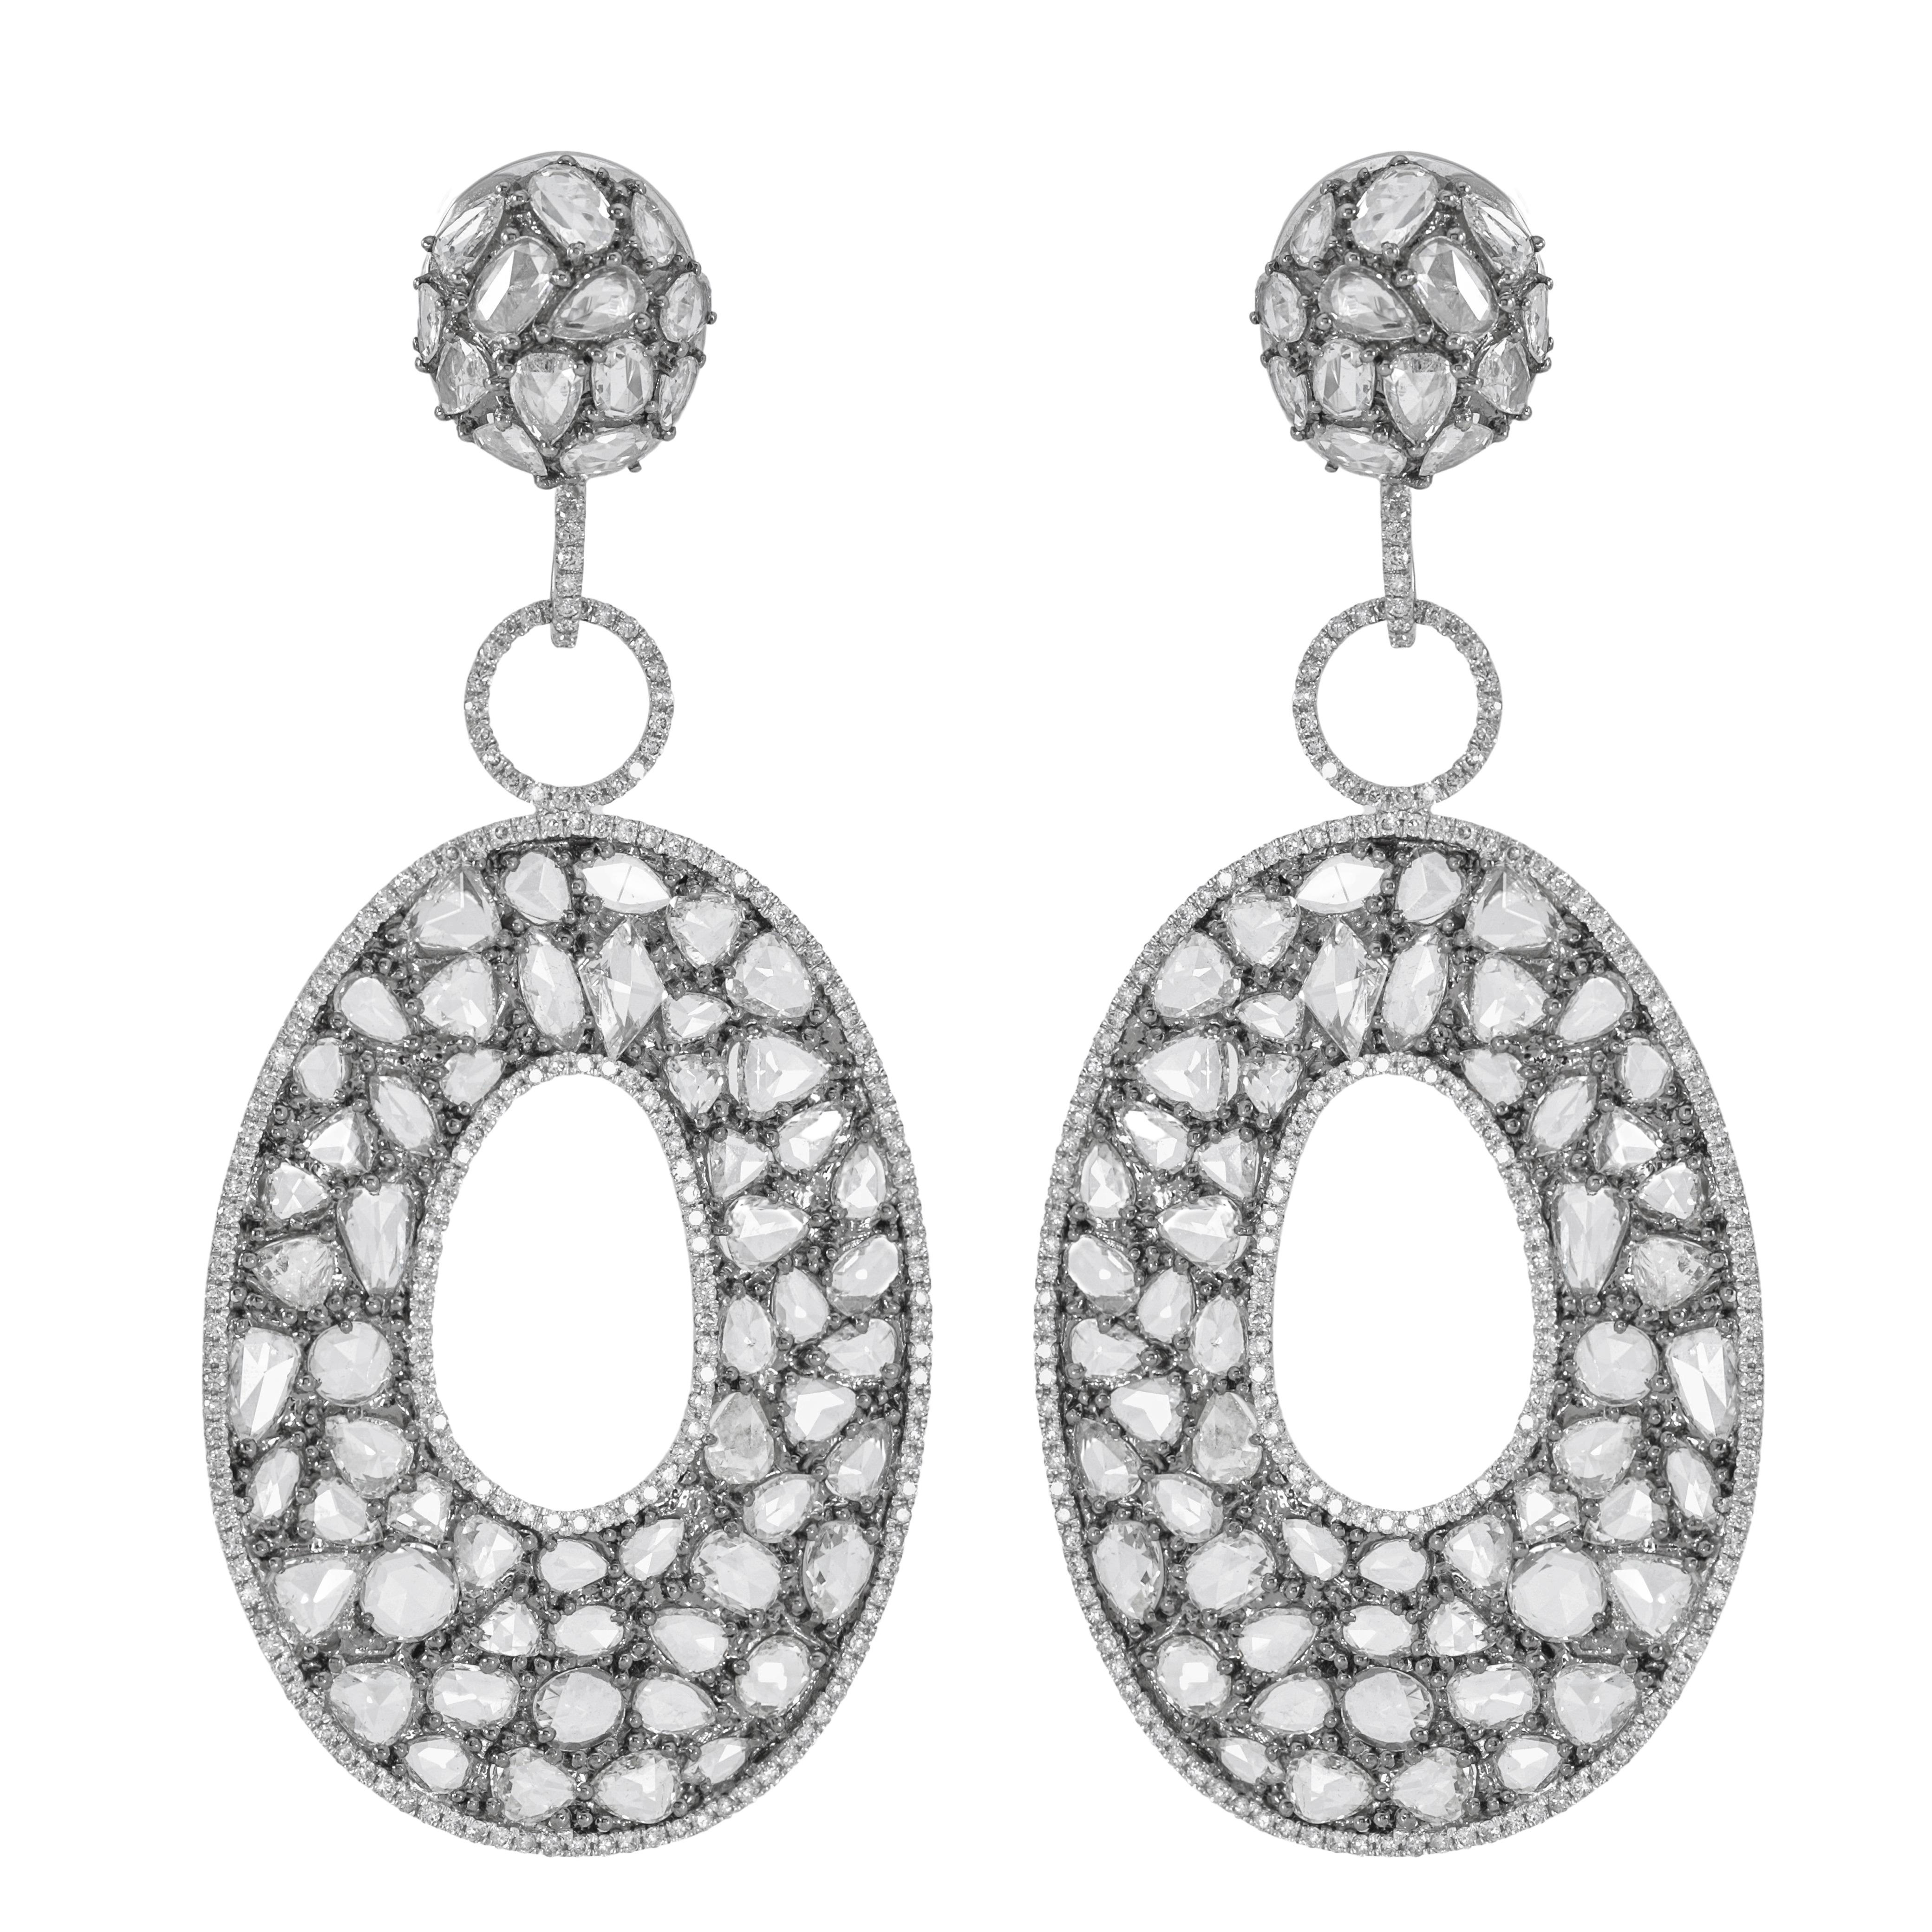 18 kt white gold rhodium plated diamond earrings adorned with 26.43 cts tw of rose cut diamonds.
Diana M. is a leading supplier of top-quality fine jewelry for over 35 years.
Diana M is one-stop shop for all your jewelry shopping, carrying line of